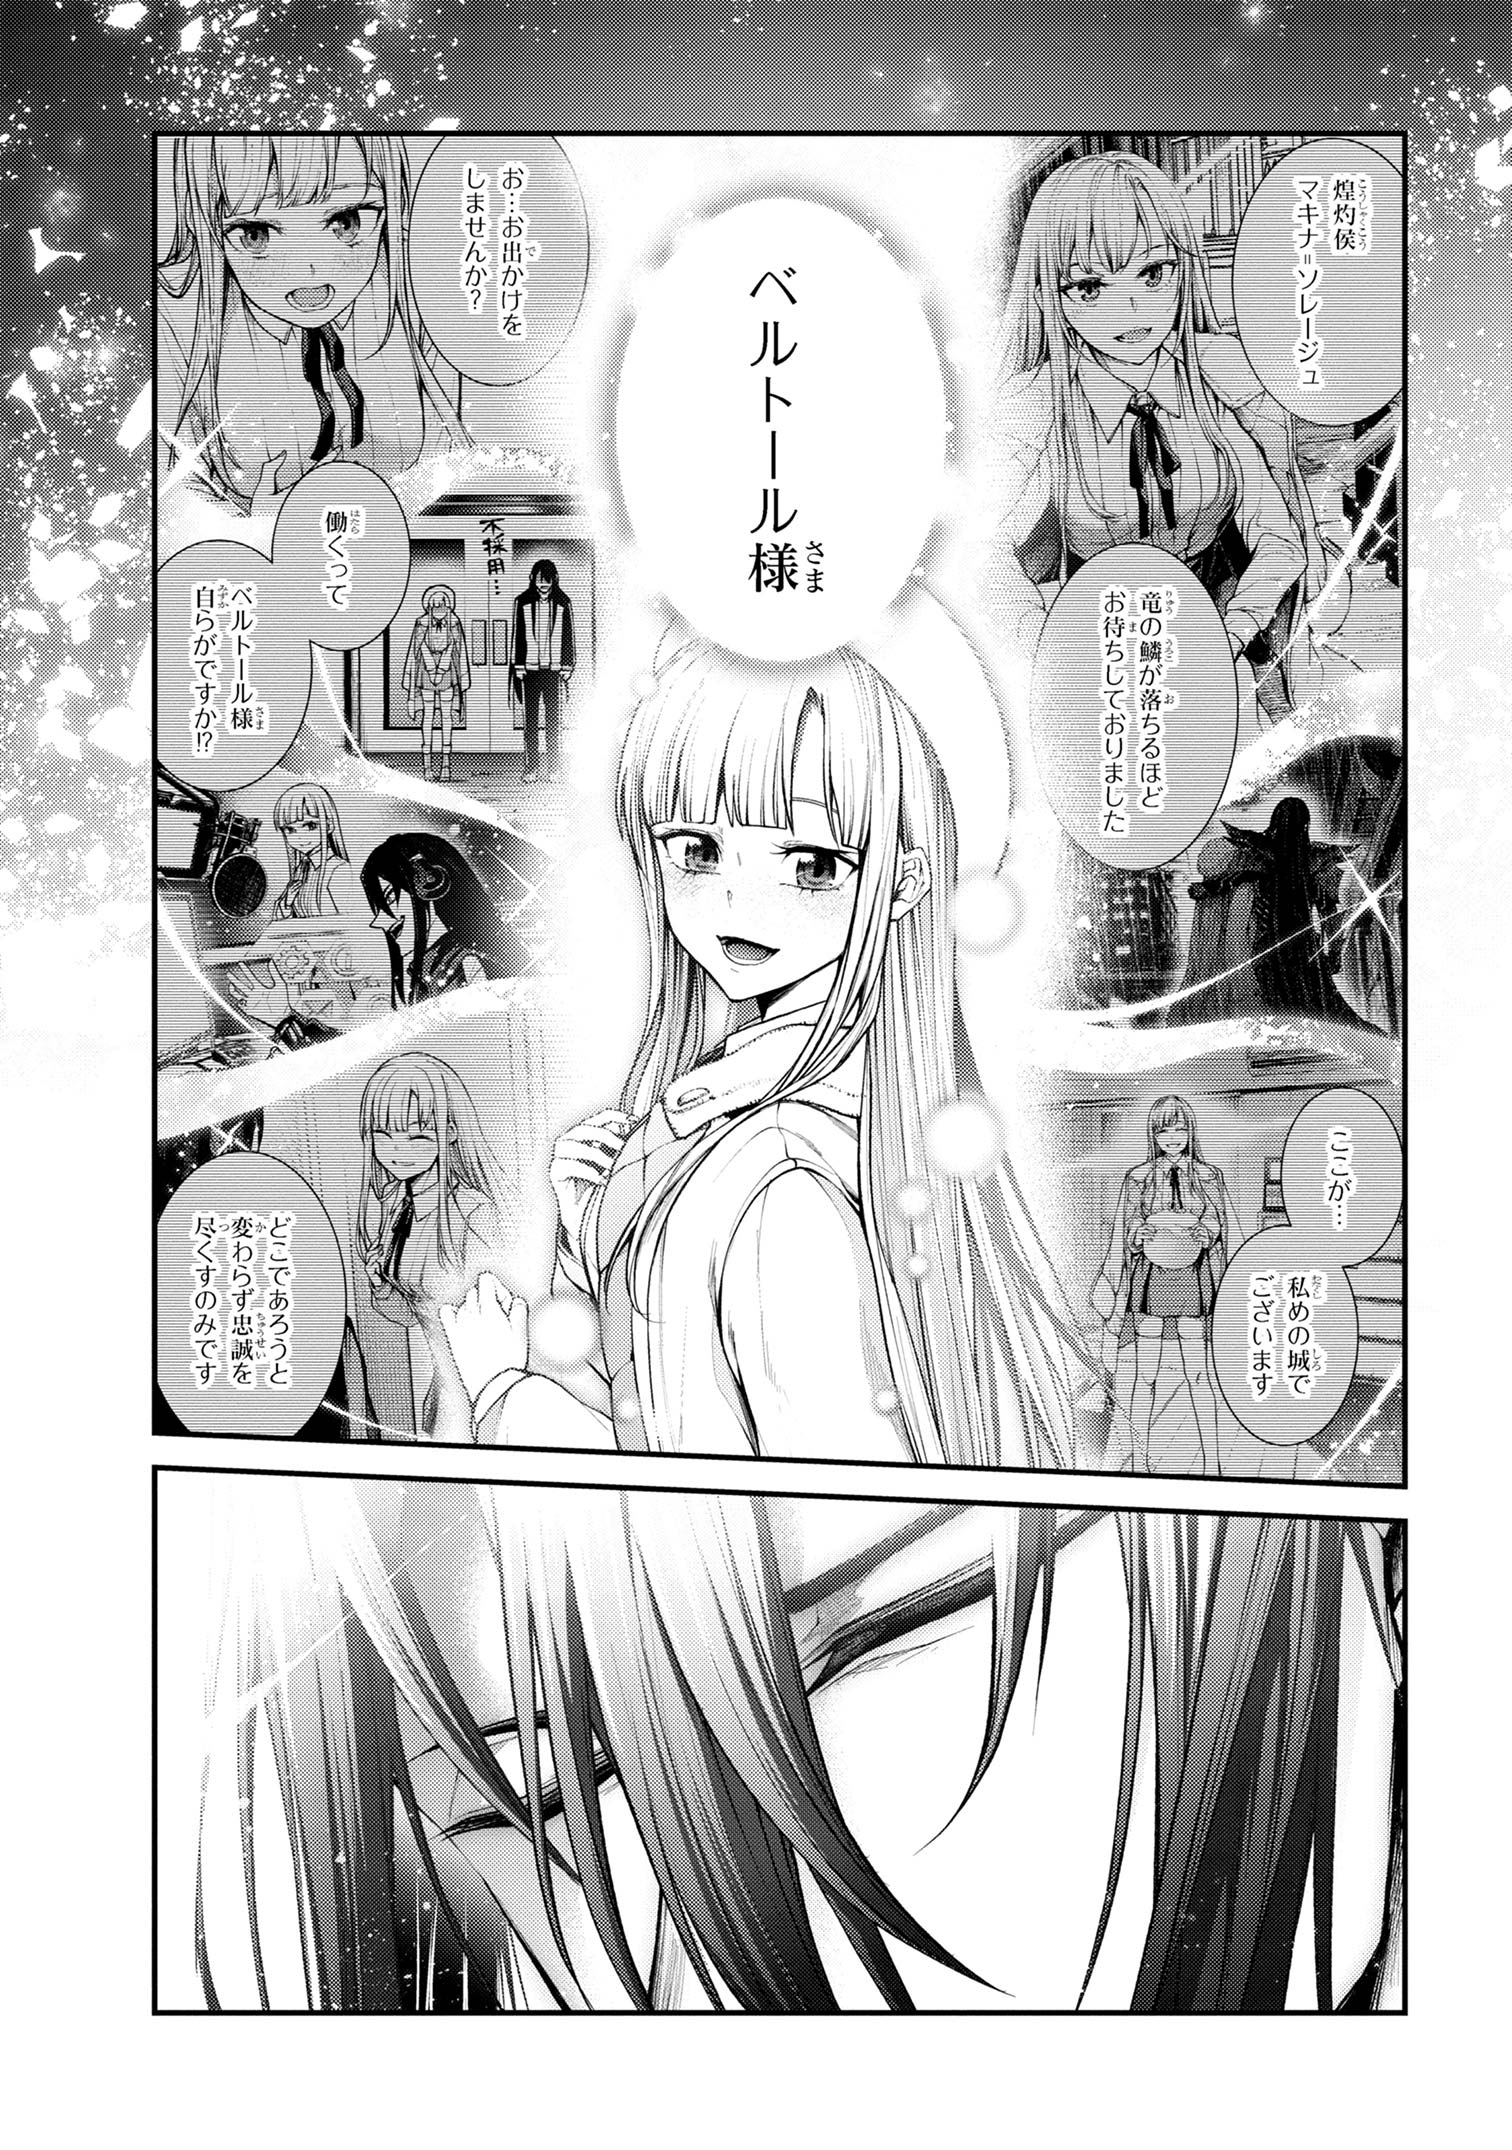 Maou 2099 - Chapter 8.3 - Page 6